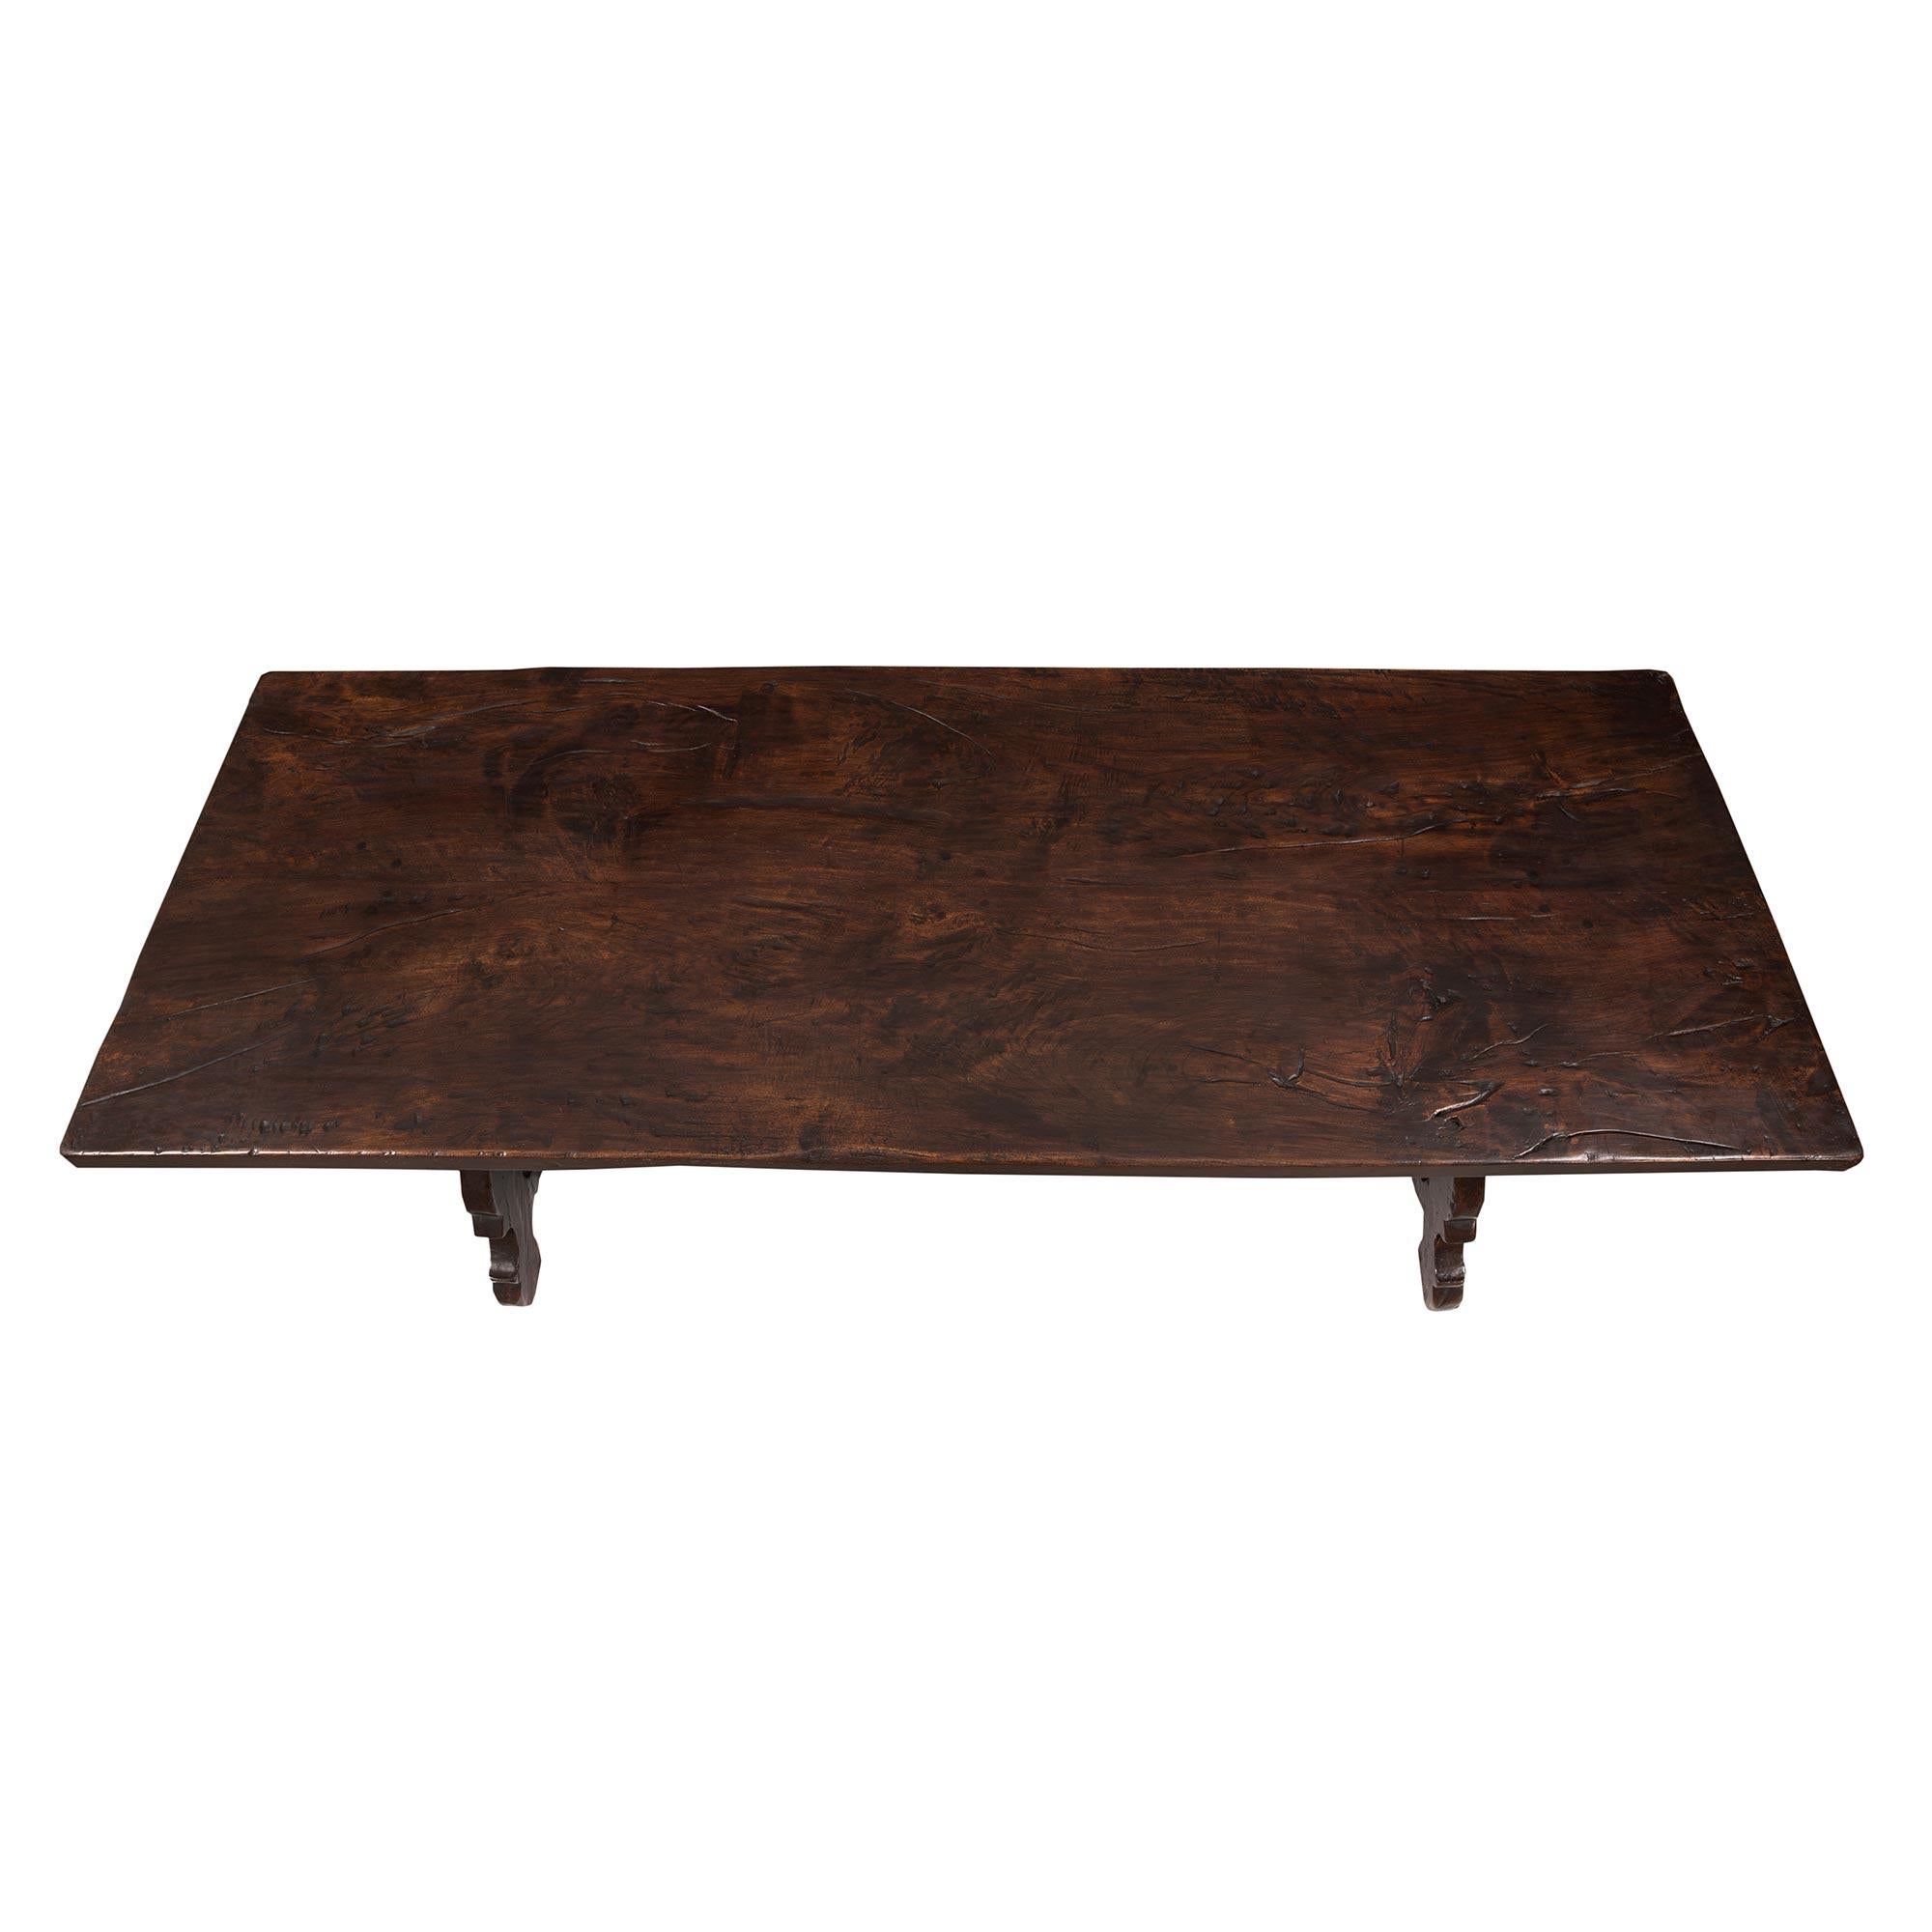 A handsome Spanish mid-19th century Country style dark oak trestle dining/center table. The table is raised by most decorative finely scrolled slanted supports at each side connected by the striking original hand beaten wrought iron interlocking